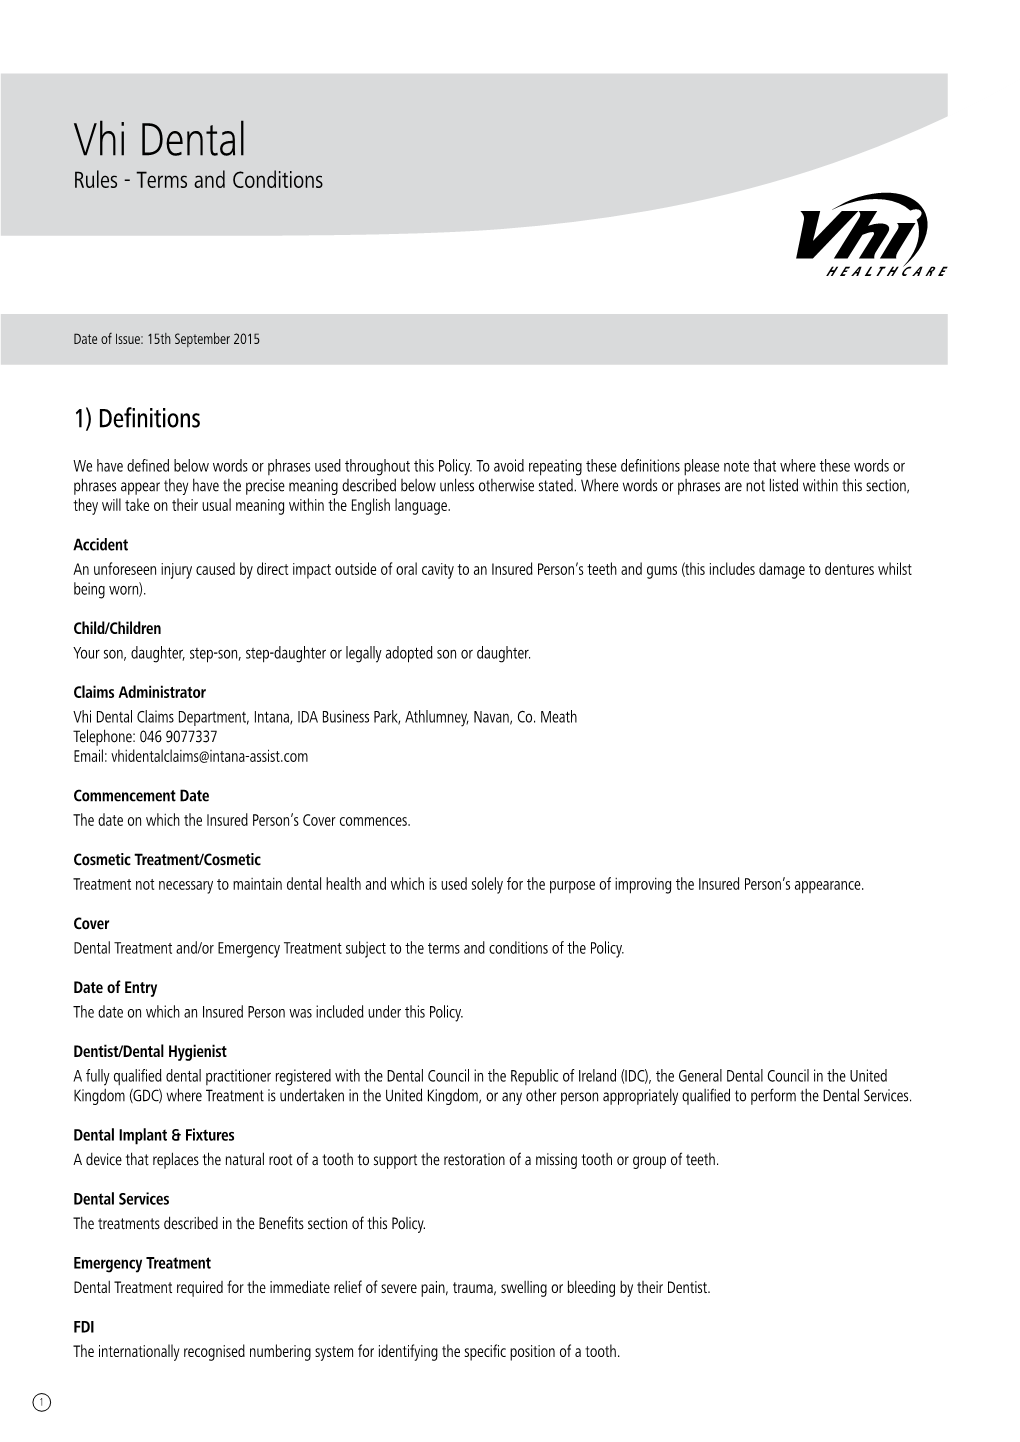 Vhi Dental Rules - Terms and Conditions